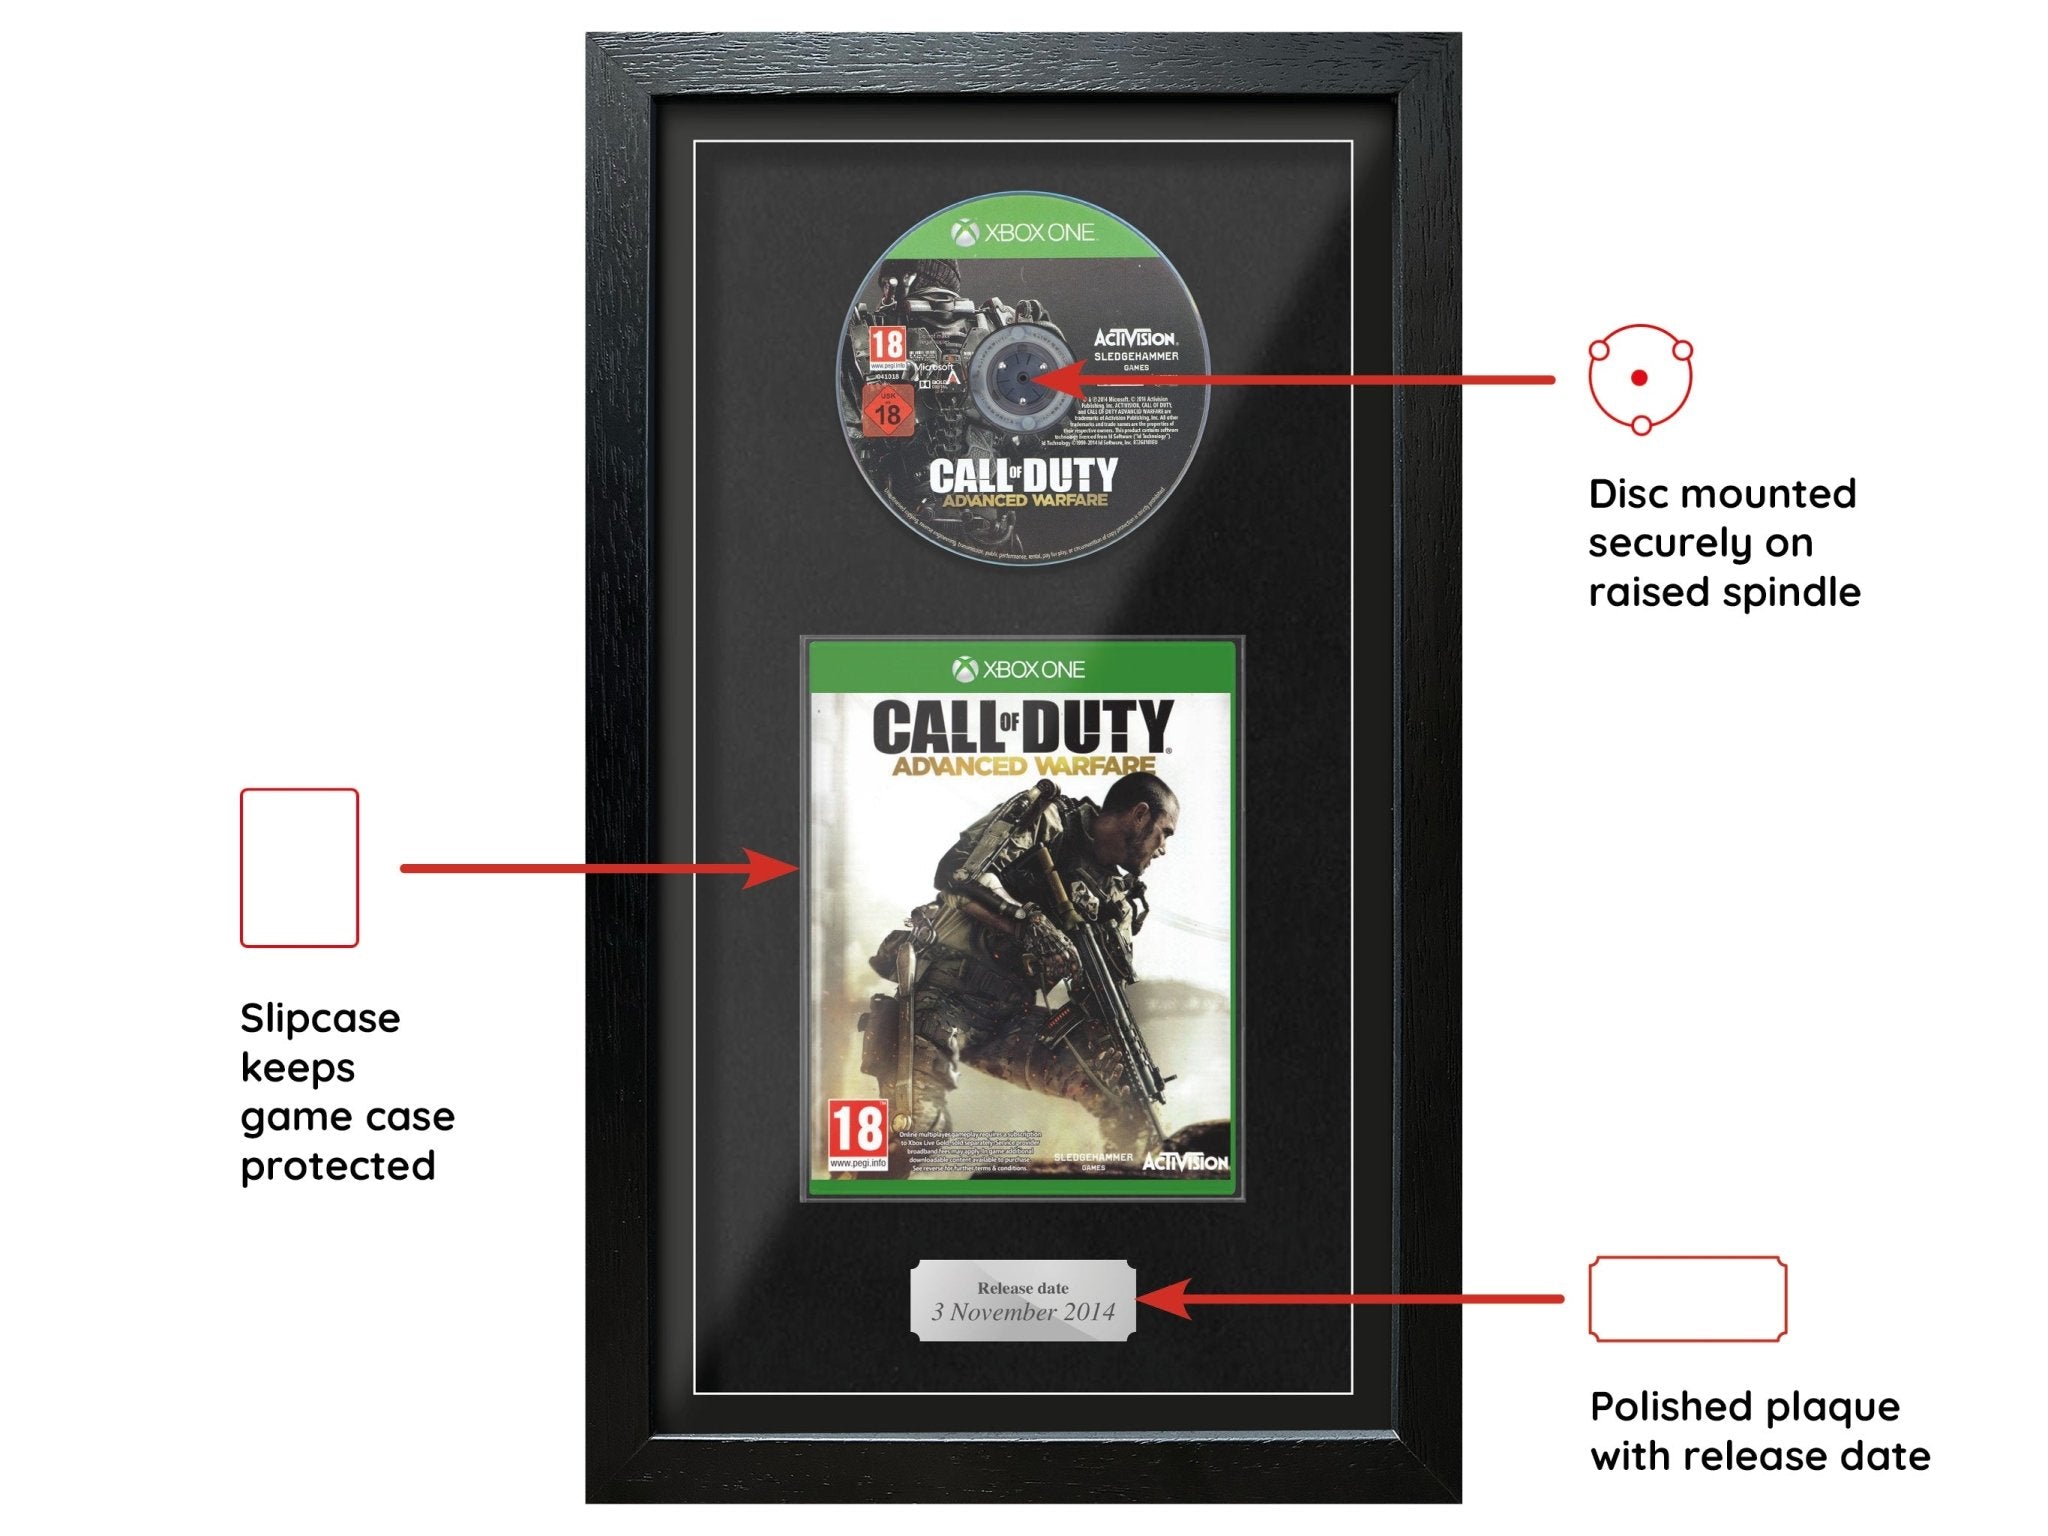 Call of Duty: Advanced Warfare (Xbox One) Exhibition Range Framed Game - Frame-A-Game